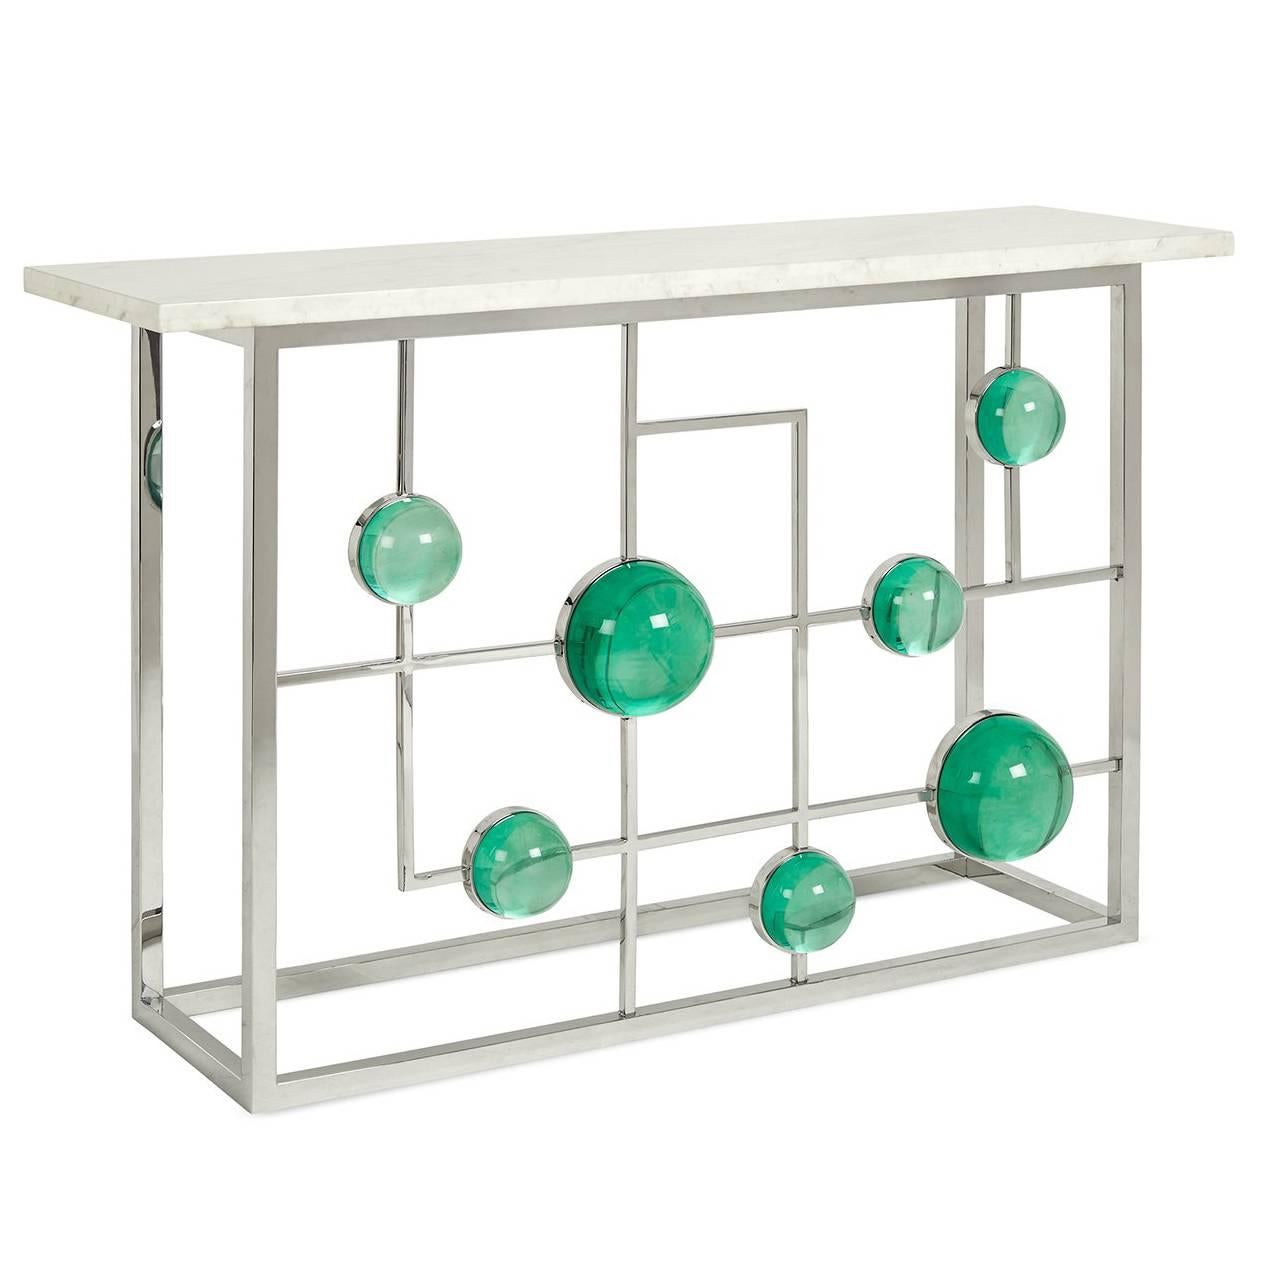 Globo Lucite and Nickel Fretwork Console For Sale